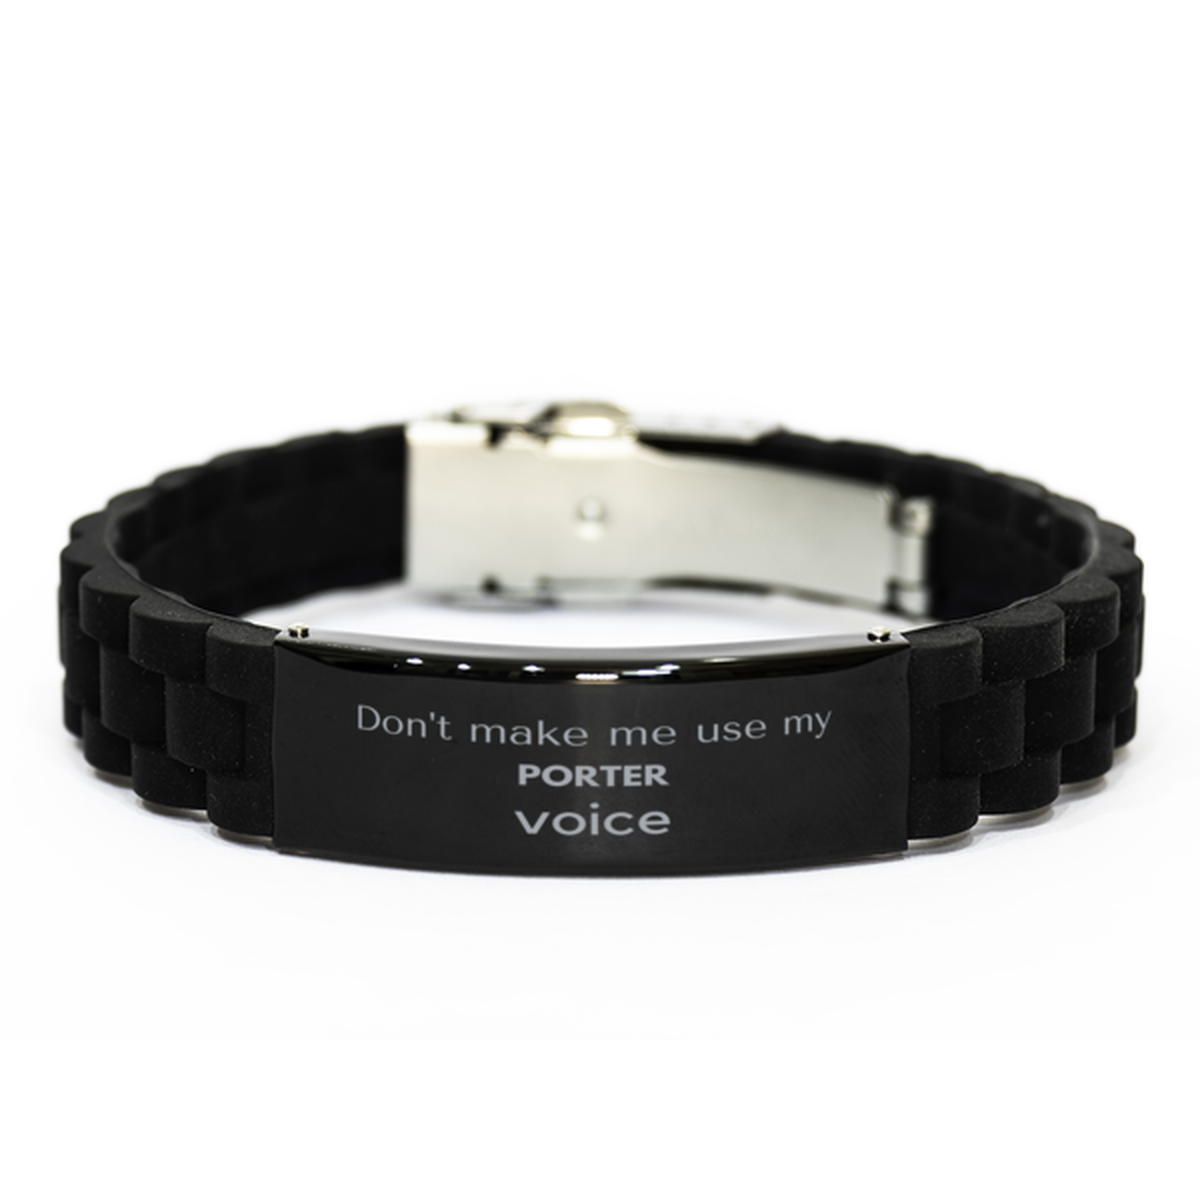 Don't make me use my Porter voice, Sarcasm Porter Gifts, Christmas Porter Black Glidelock Clasp Bracelet Birthday Unique Gifts For Porter Coworkers, Men, Women, Colleague, Friends